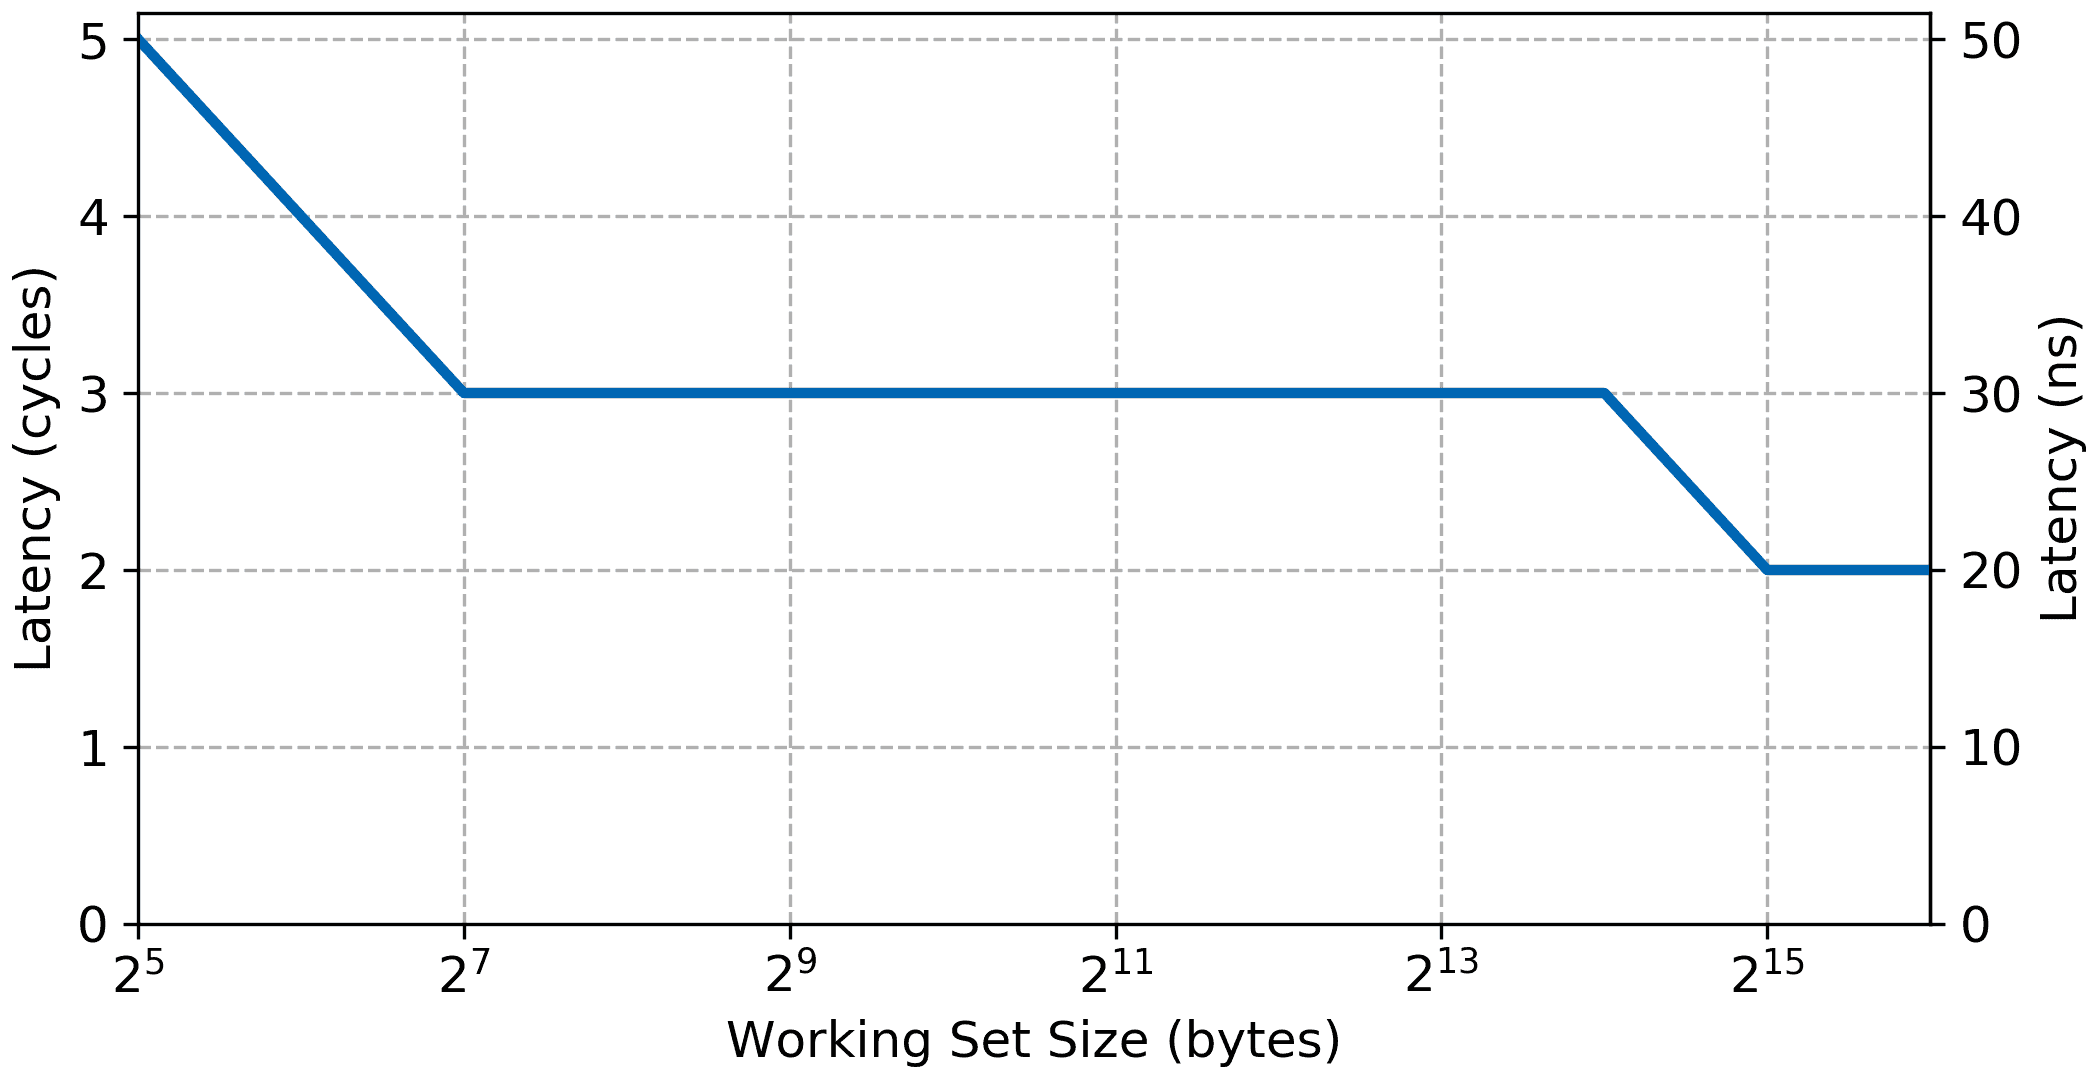 Plot of the Microblaze memory read access latency versus the working set size when running from local memory through the LMB bus.